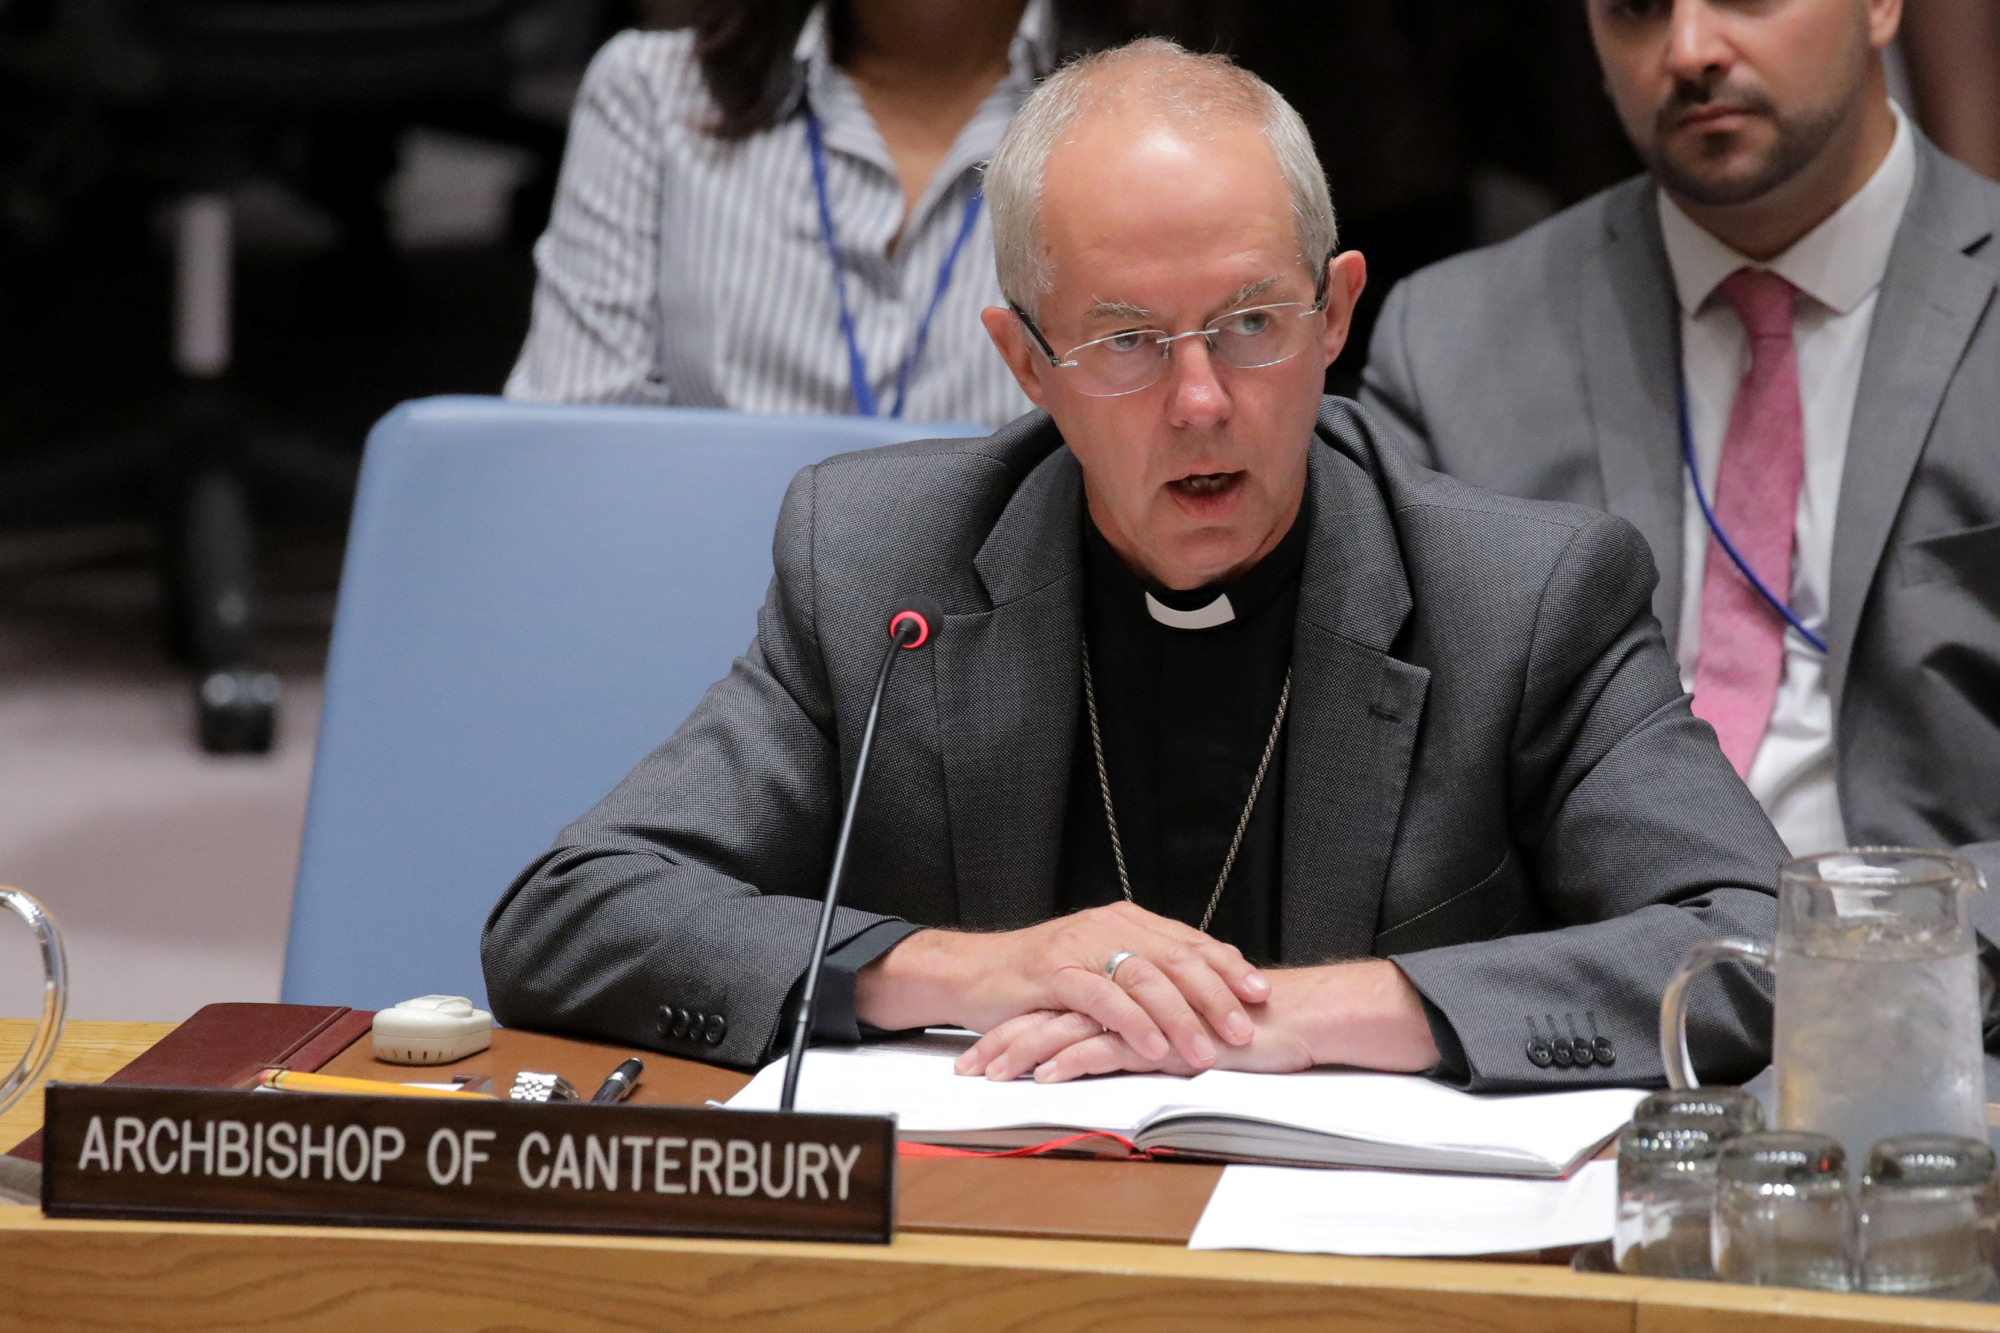 Archbishop of Canterbury Justin Welby addresses the United Nations Security Council on 'mediation and its role in conflict' during an open debate on maintenance of international peace and security on Aug. 29. | REUTERS